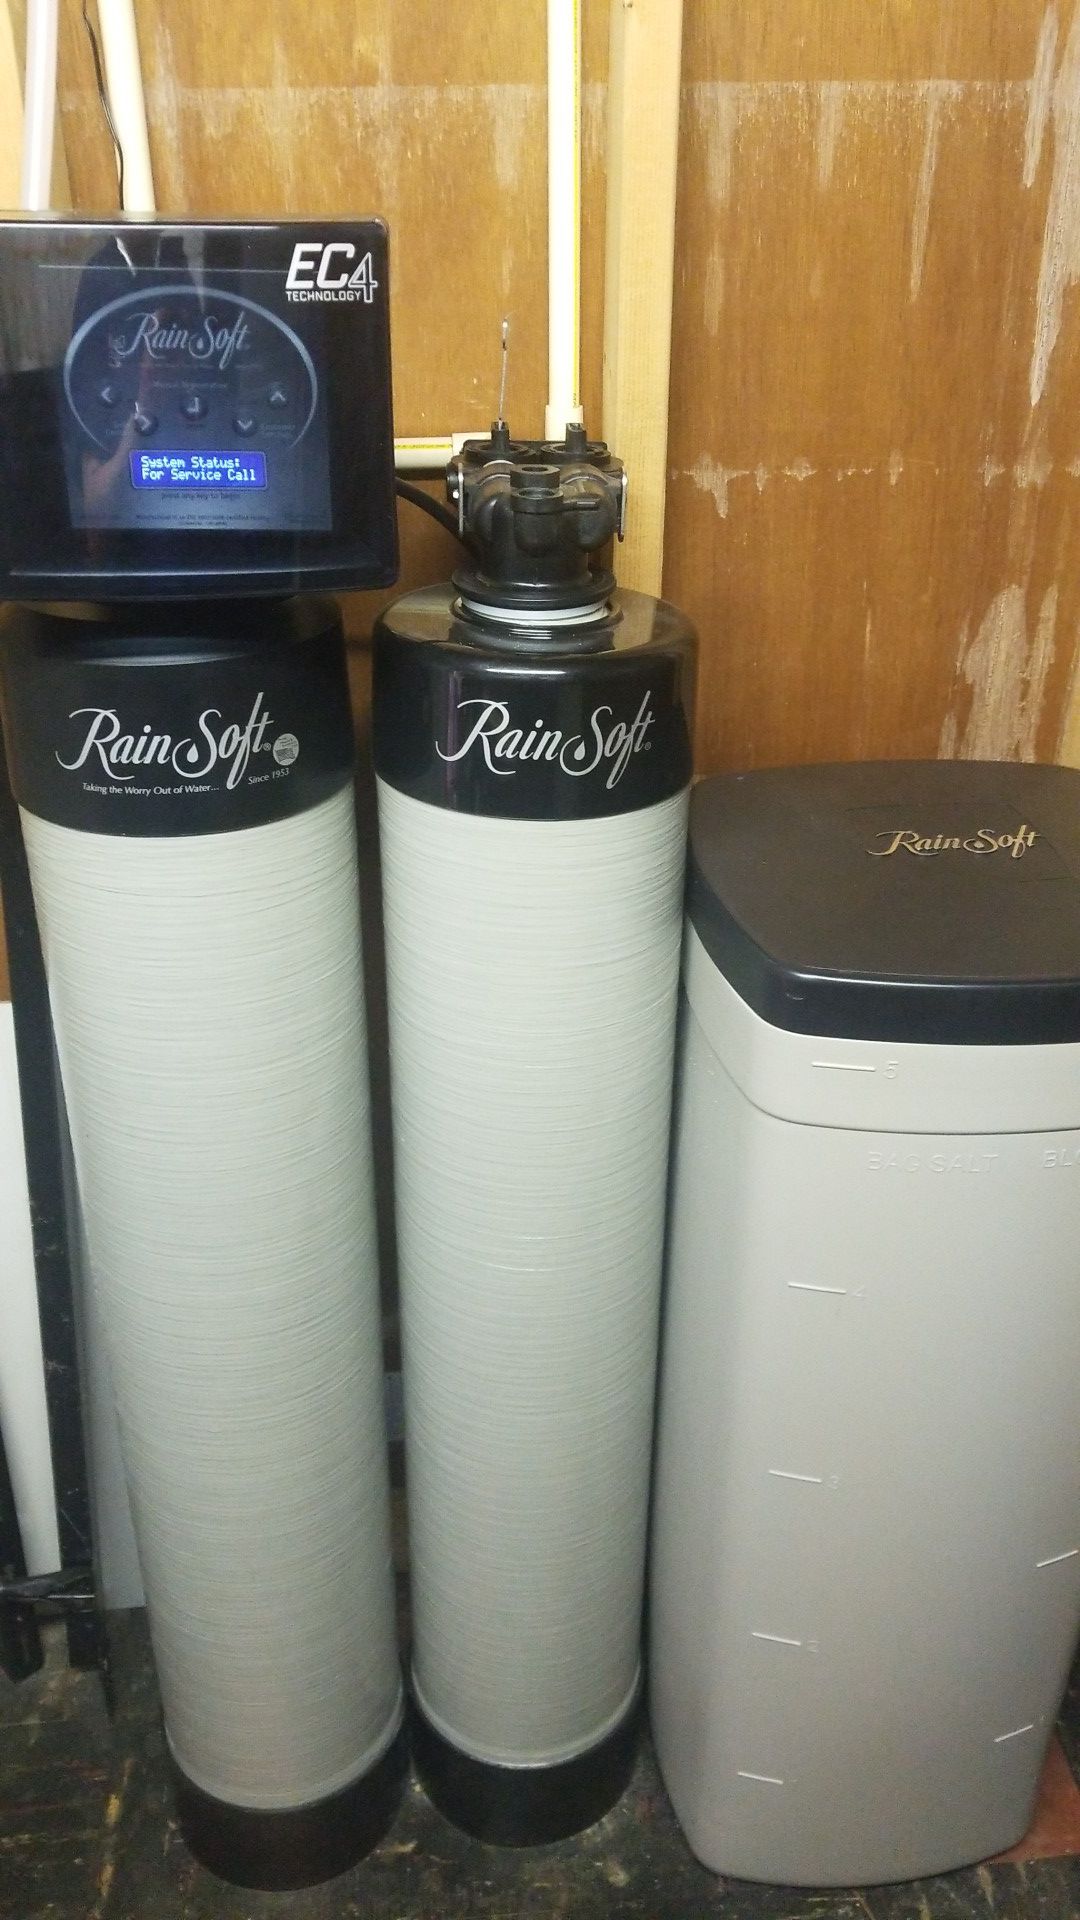 Water softener with a water fountain